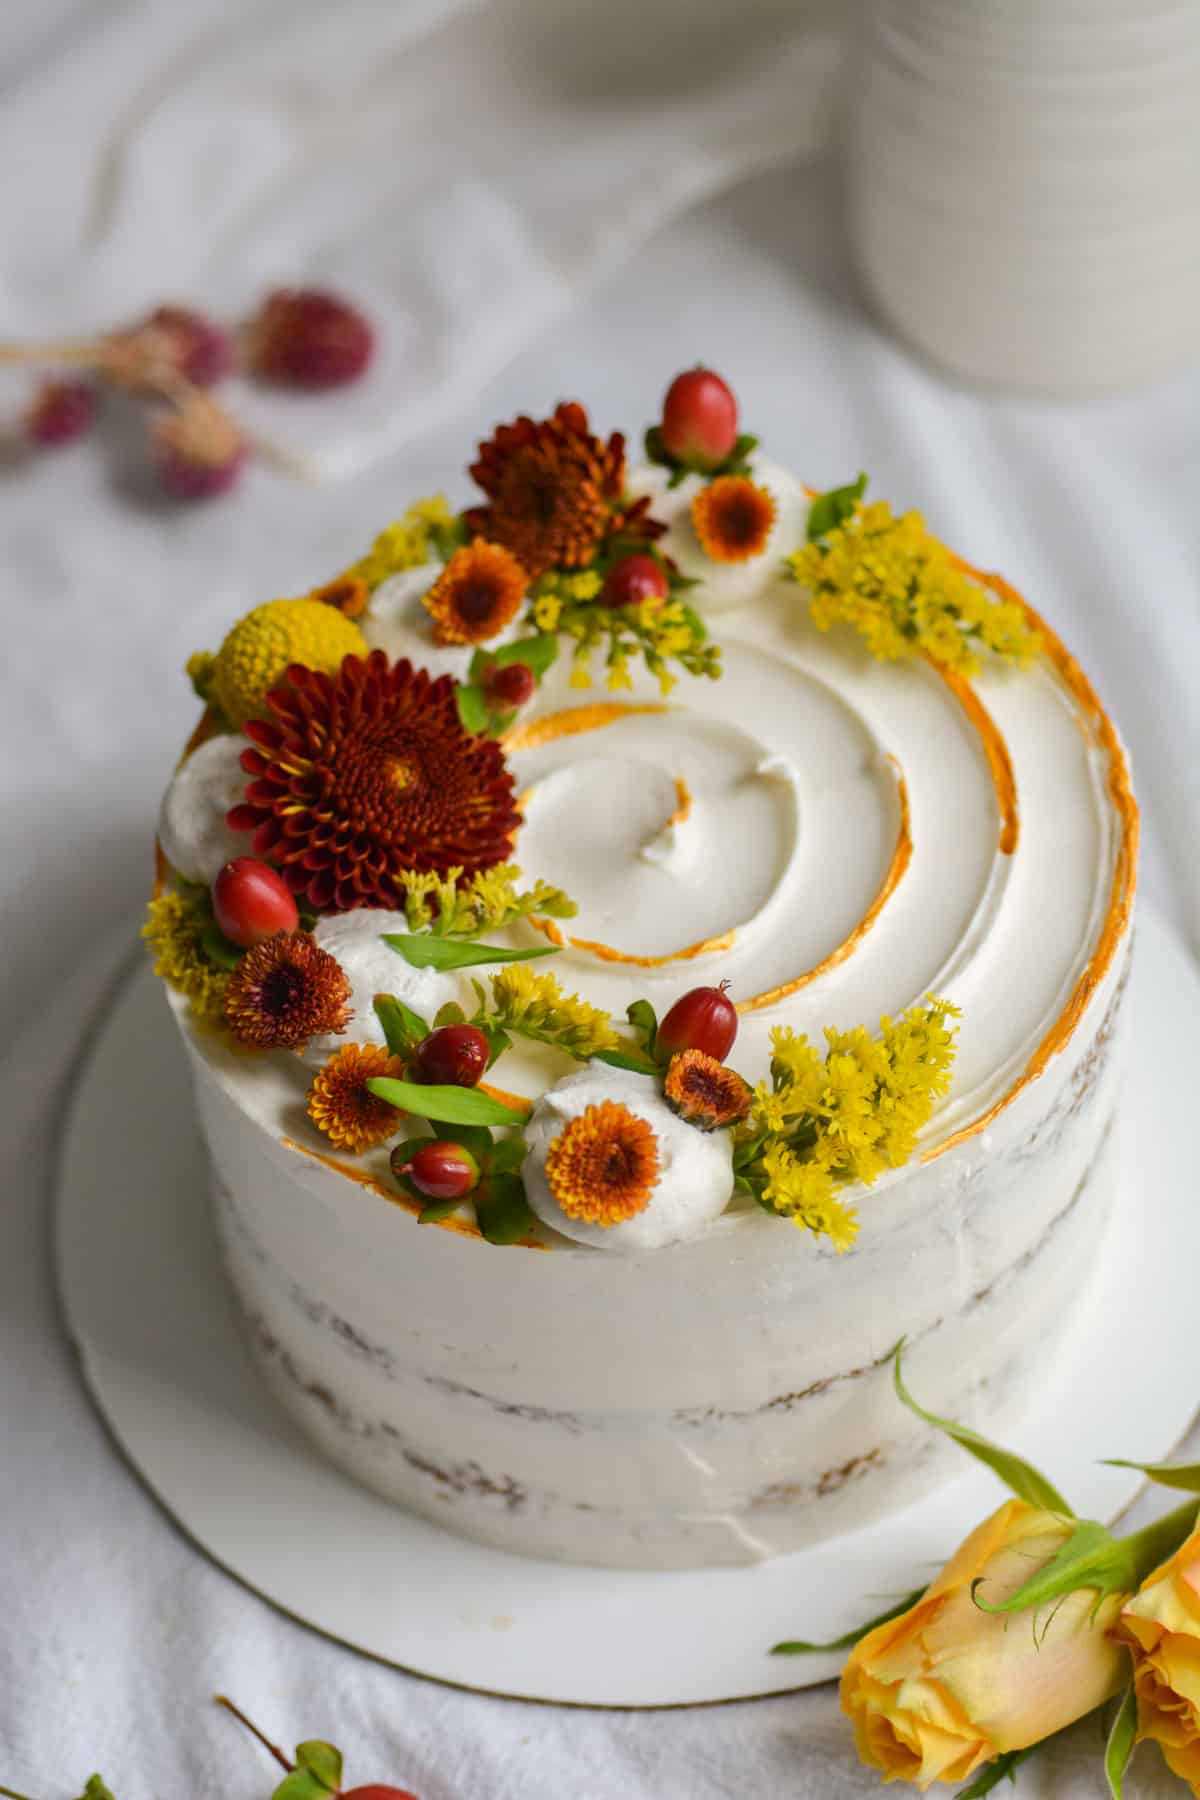 The frosted vegan apple spice cake decorated with maroon and yellow flowers.